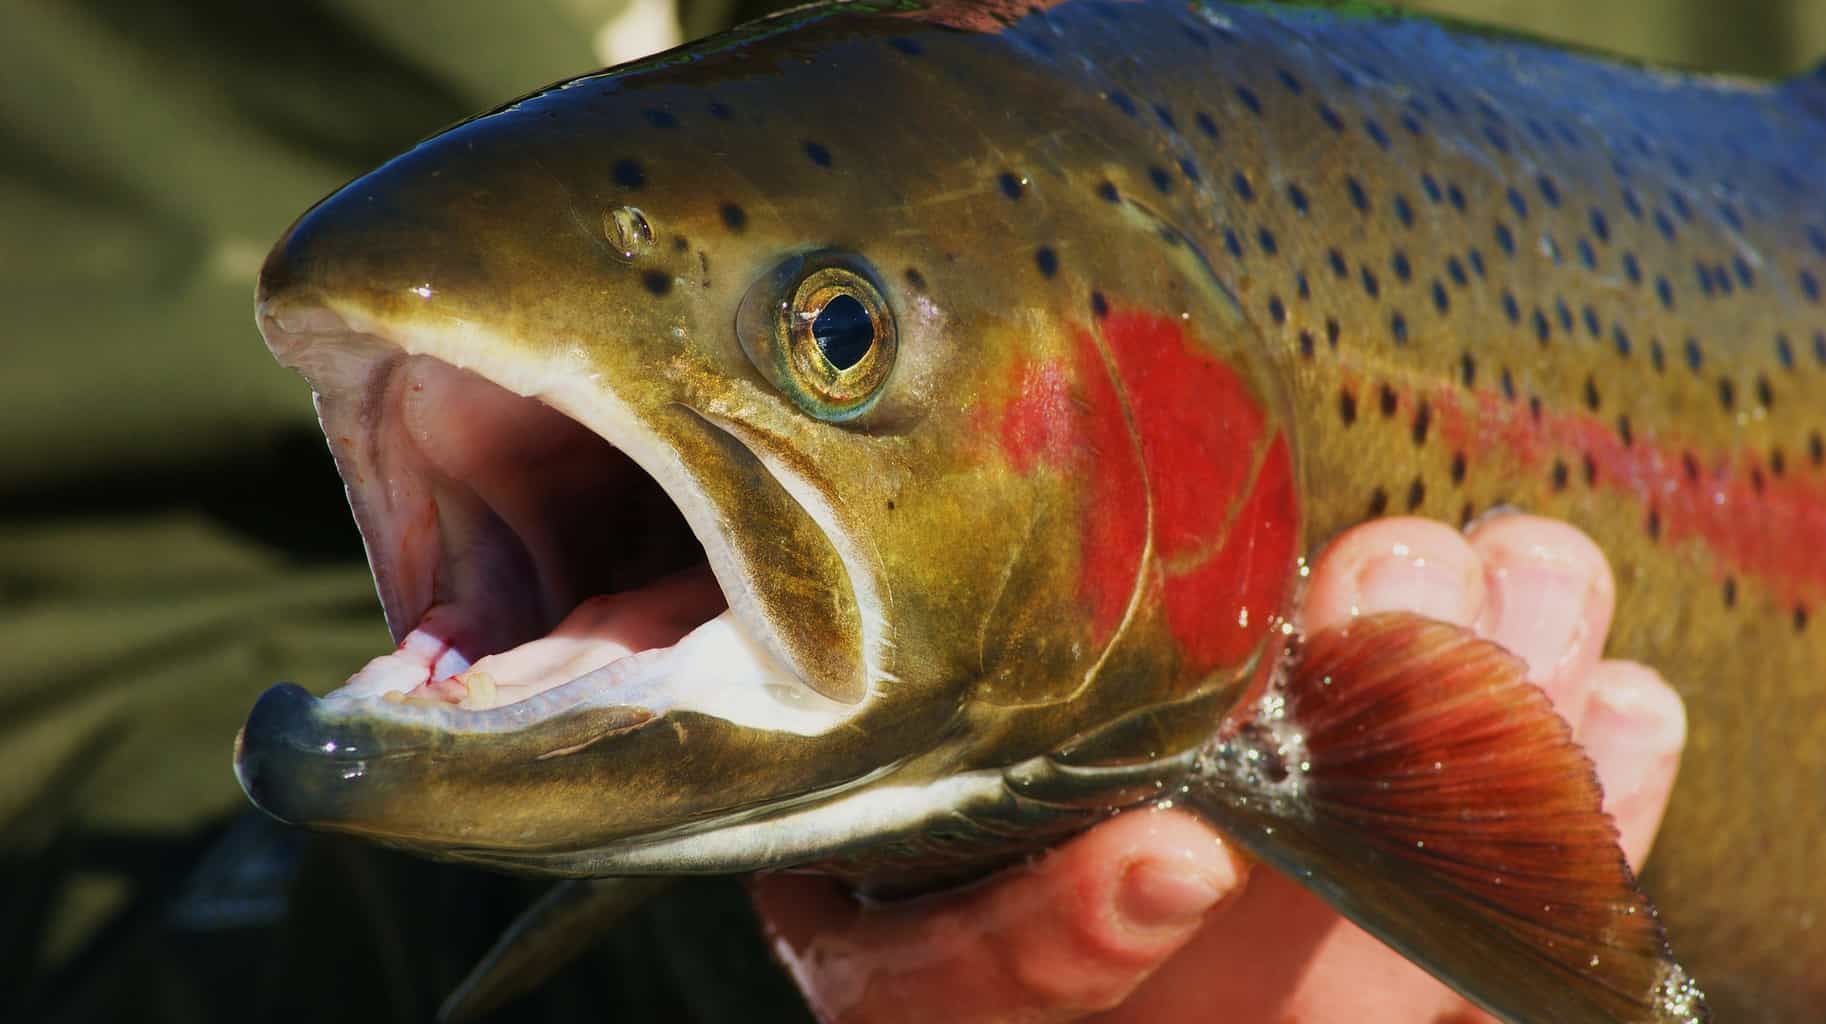 A closeup of a brightly colored trout.